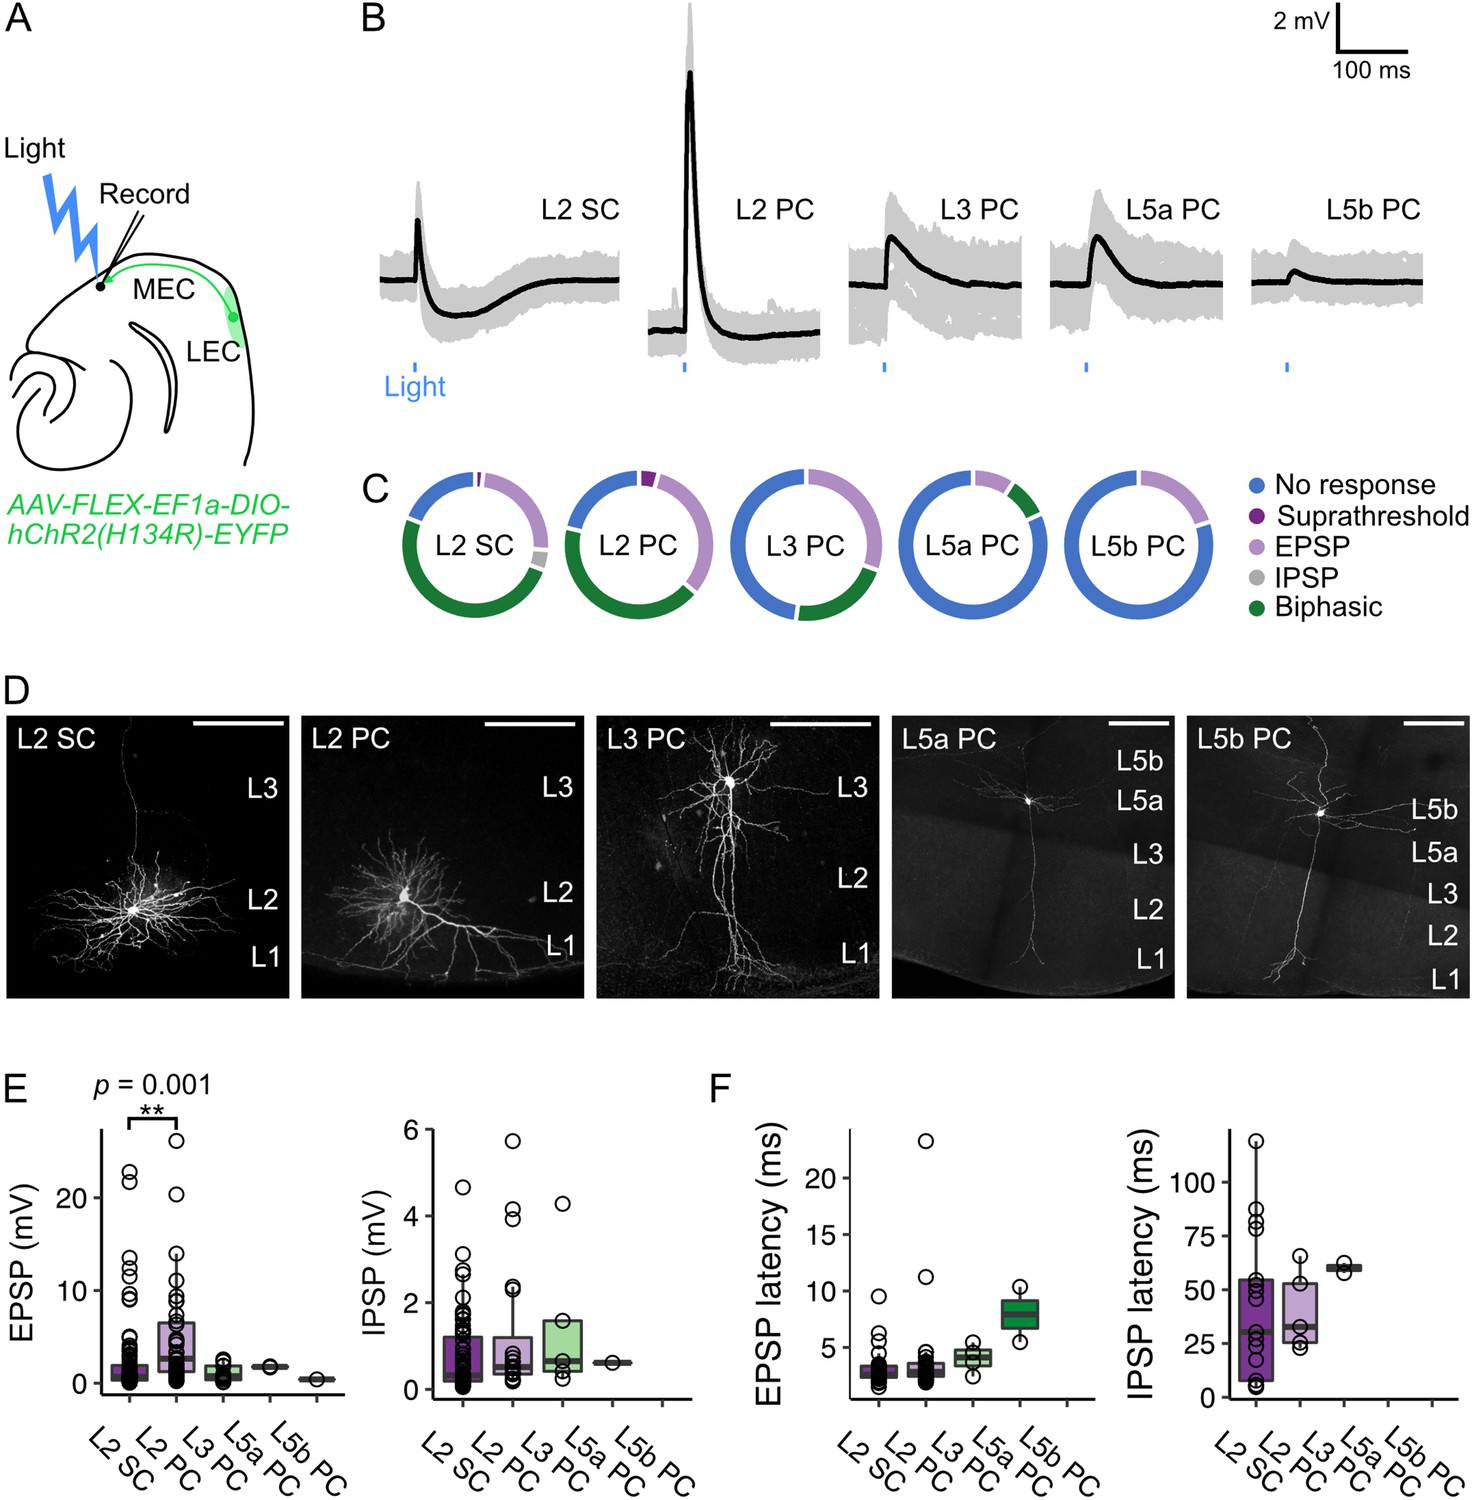 Alice prinsesse Stor eg Fan cells in lateral entorhinal cortex directly influence medial entorhinal  cortex through synaptic connections in layer 1 | eLife